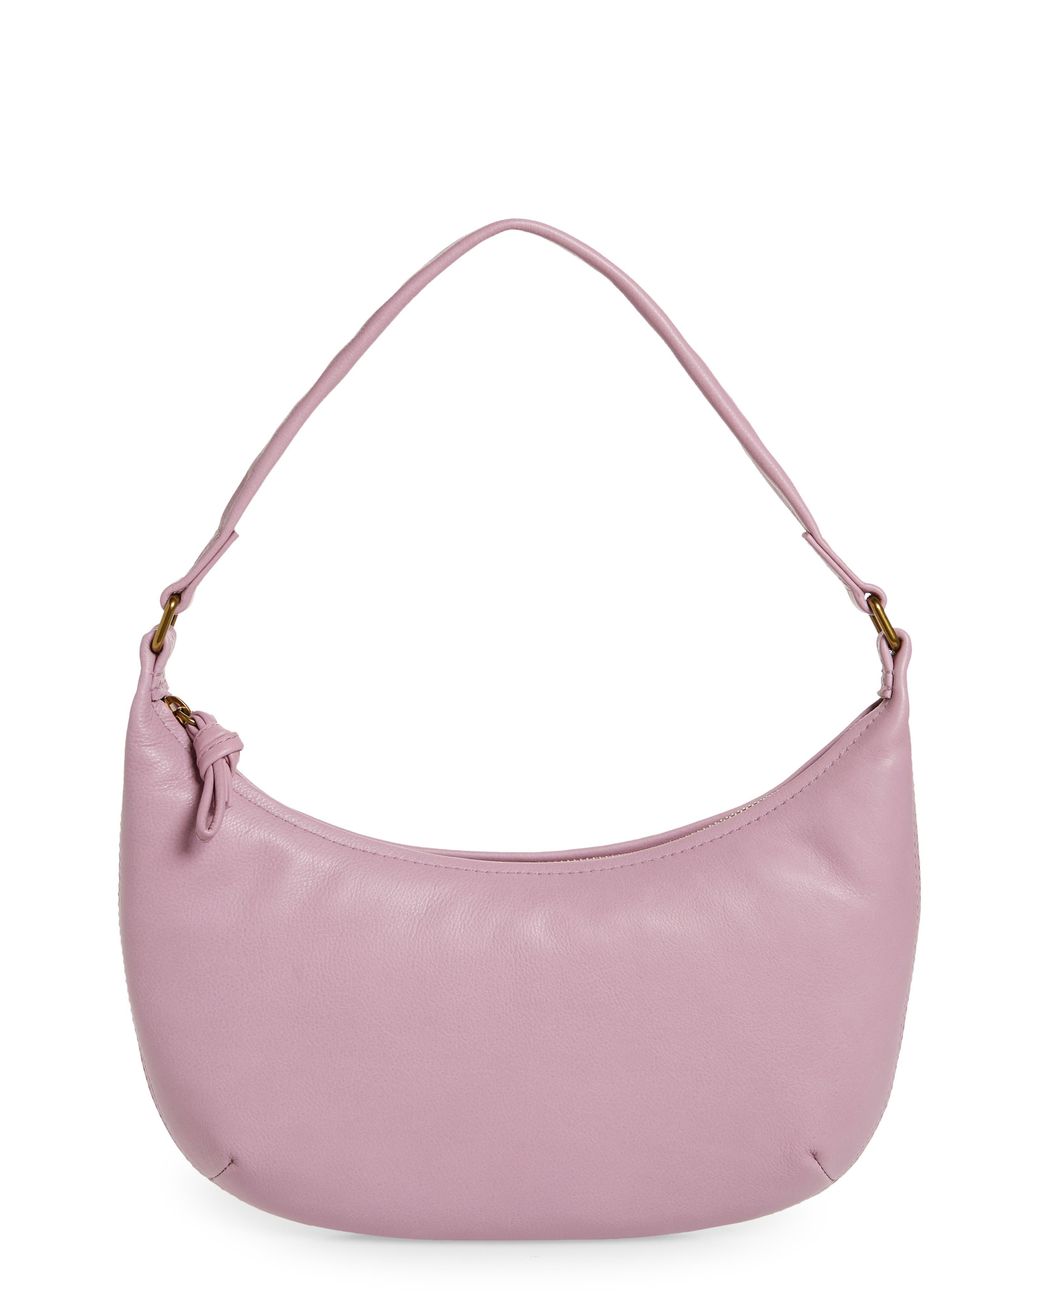 Madewell The Piazza Small Slouch Shoulder Bag